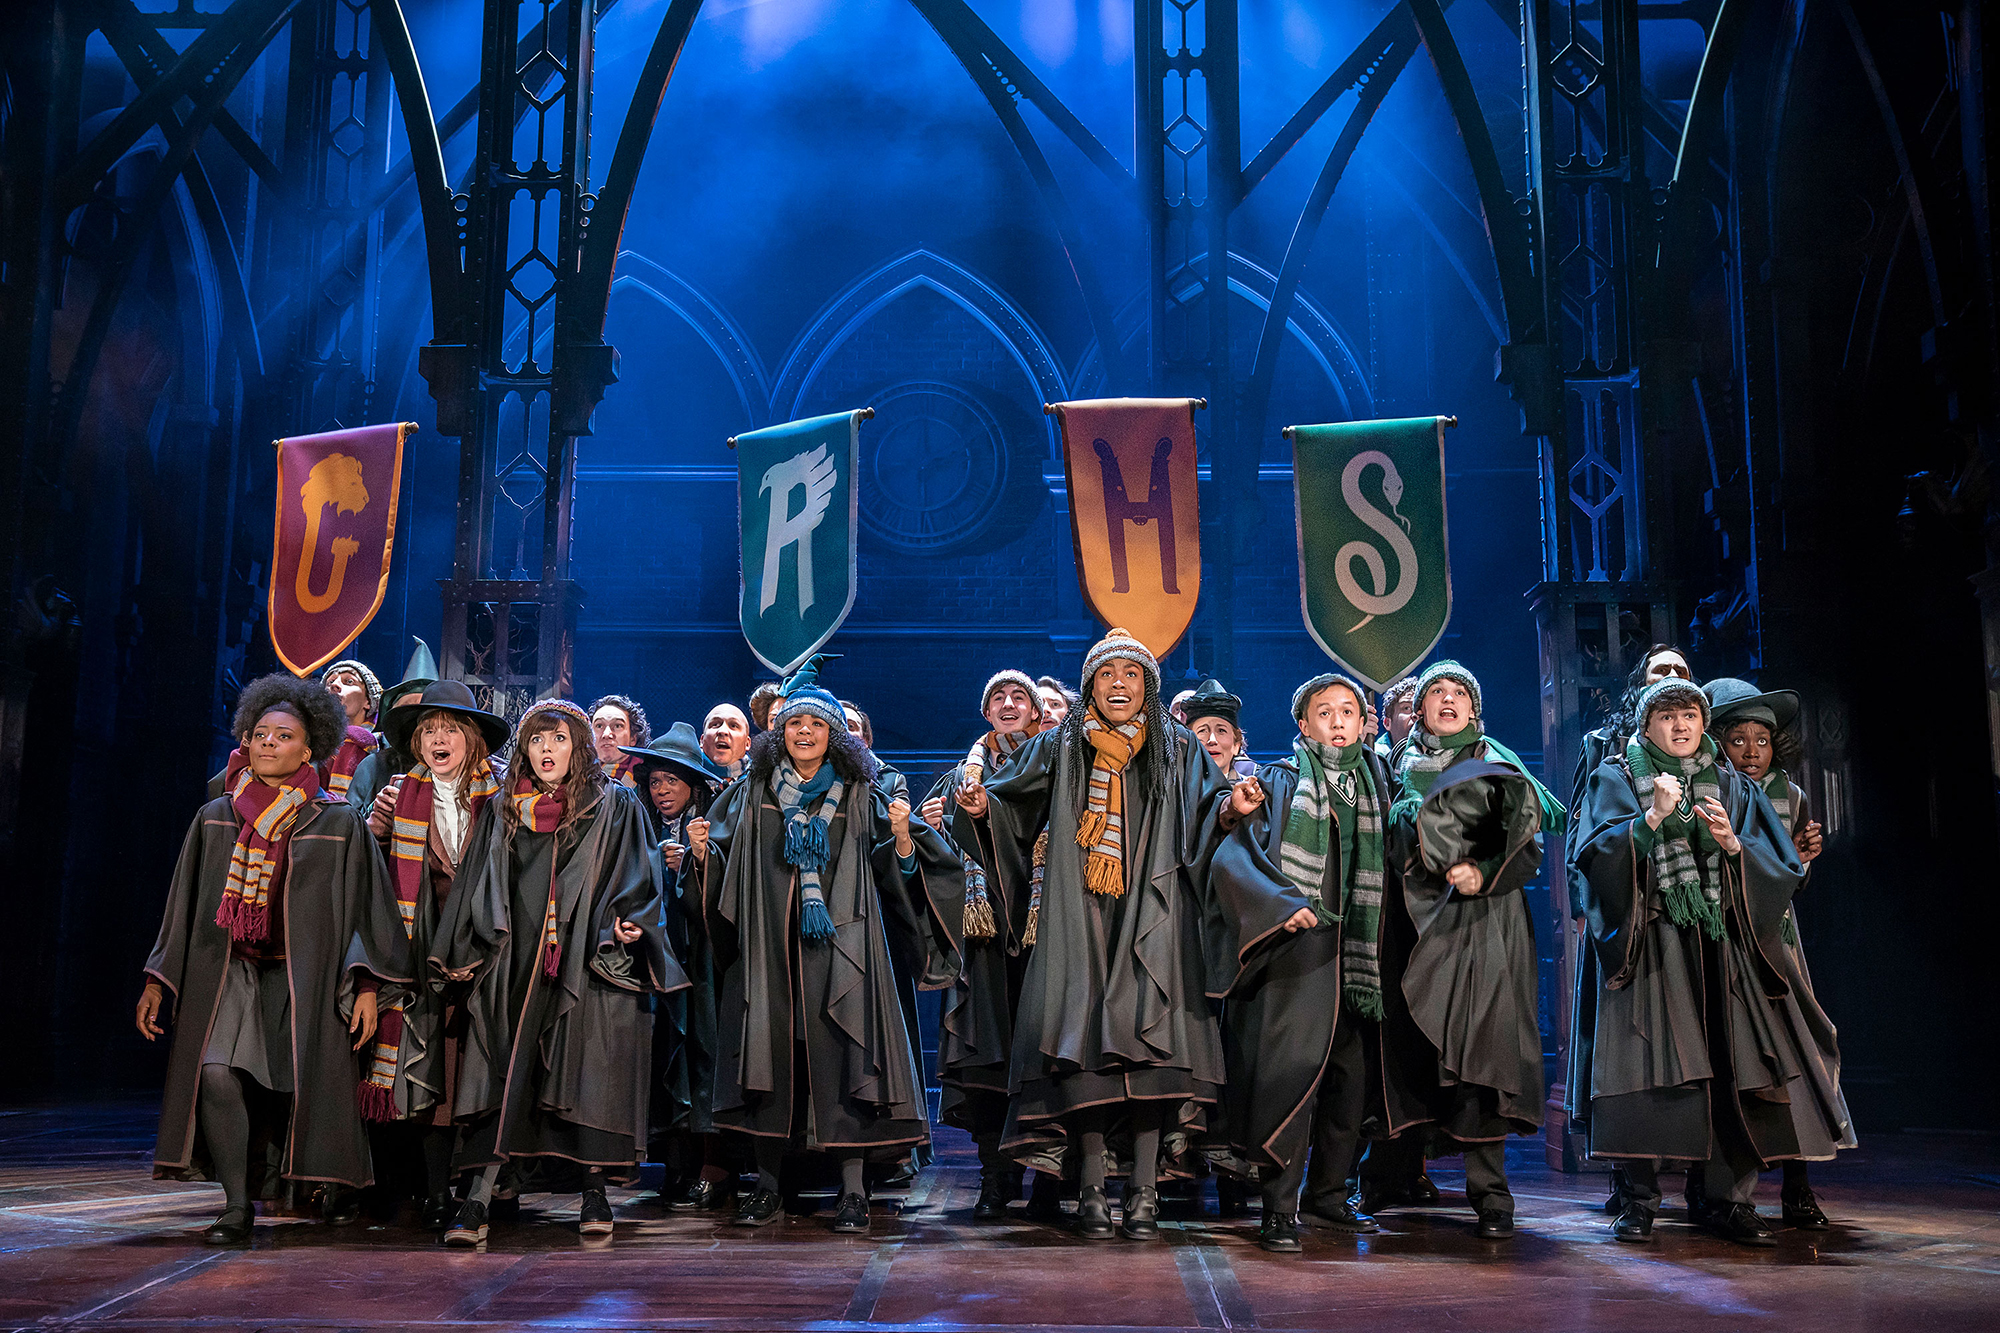 HPCC-hogwarts-students-of-all-houses-centre-stage-web-landscape